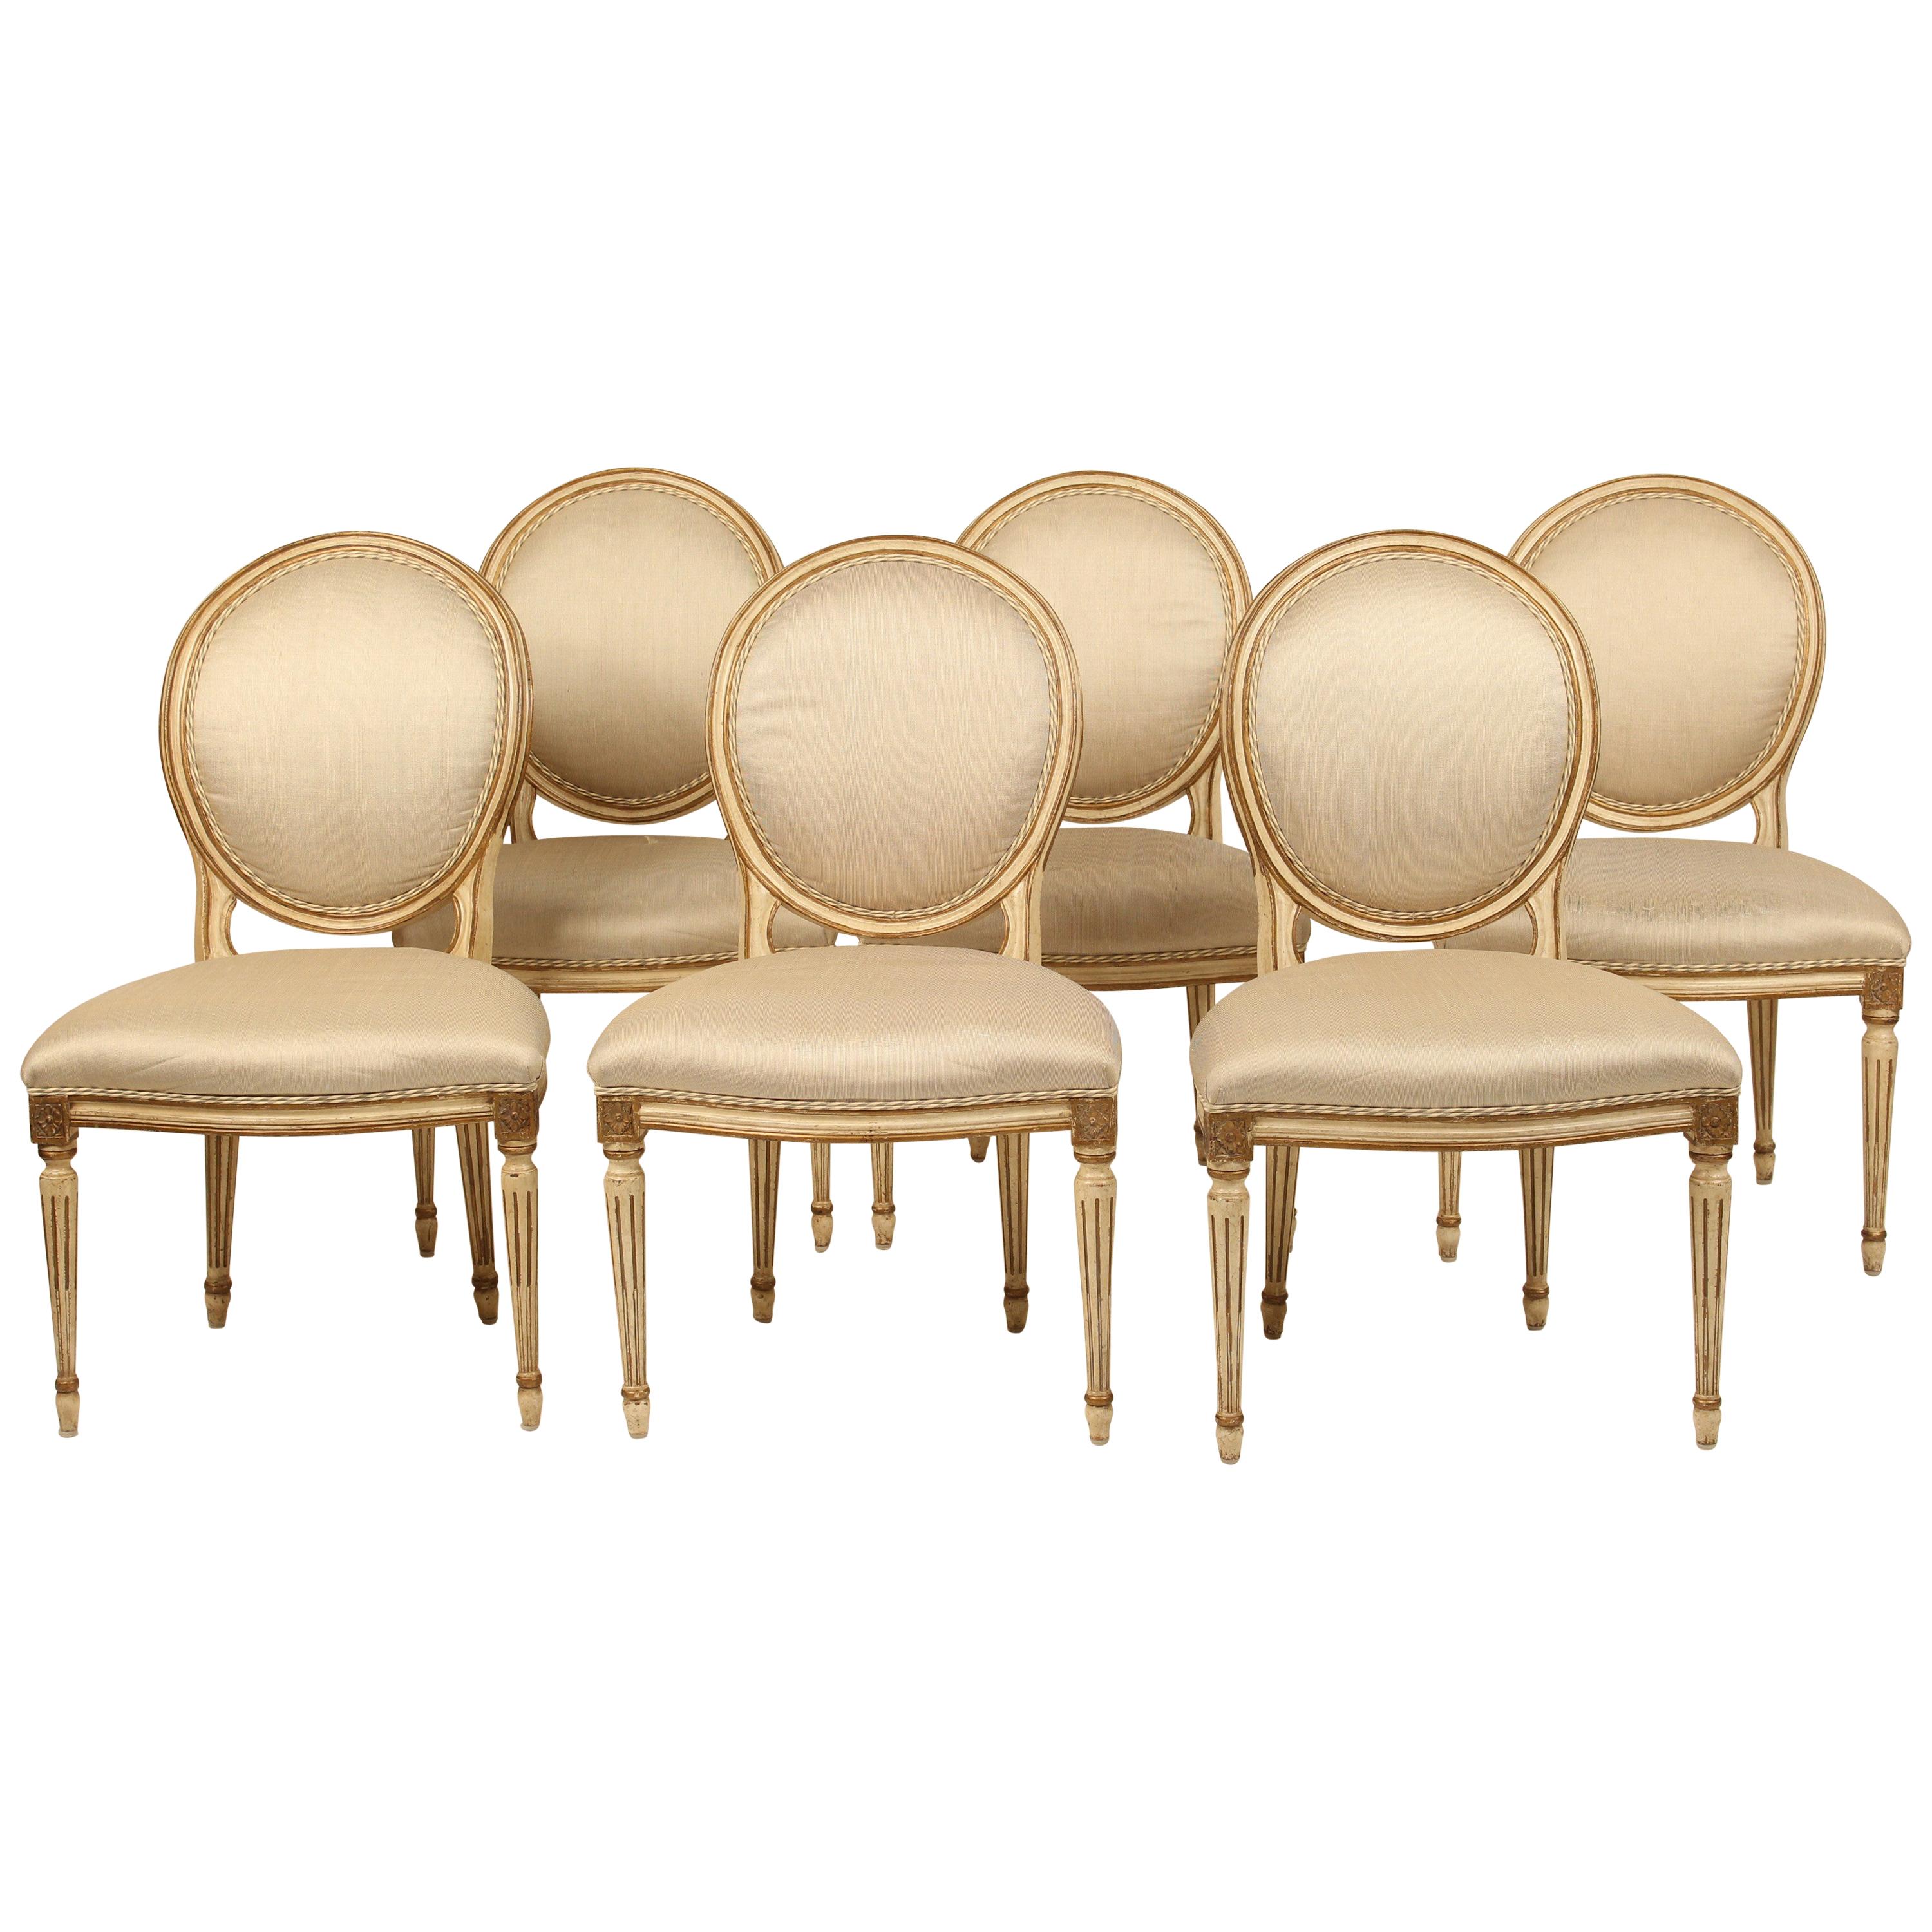 Set of 6 Painted and Gilt Louis XVI Style Dining Chairs